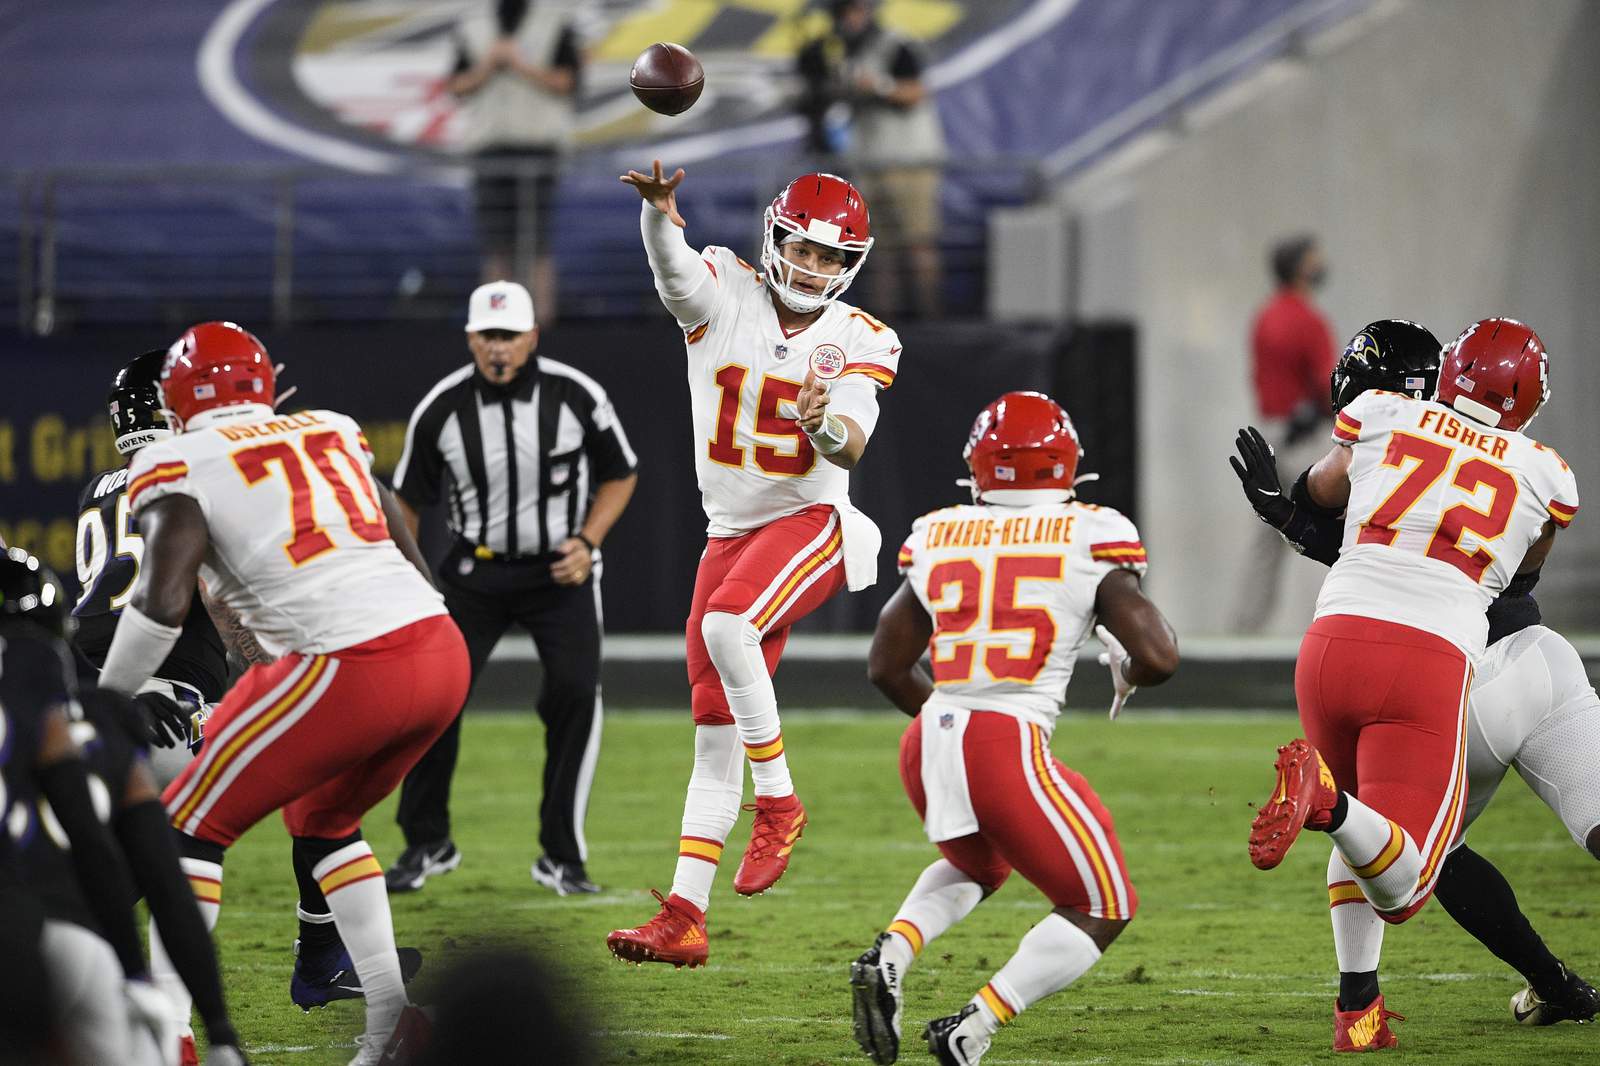 Mahomes outplays Jackson to lead Chiefs past Ravens 34-20